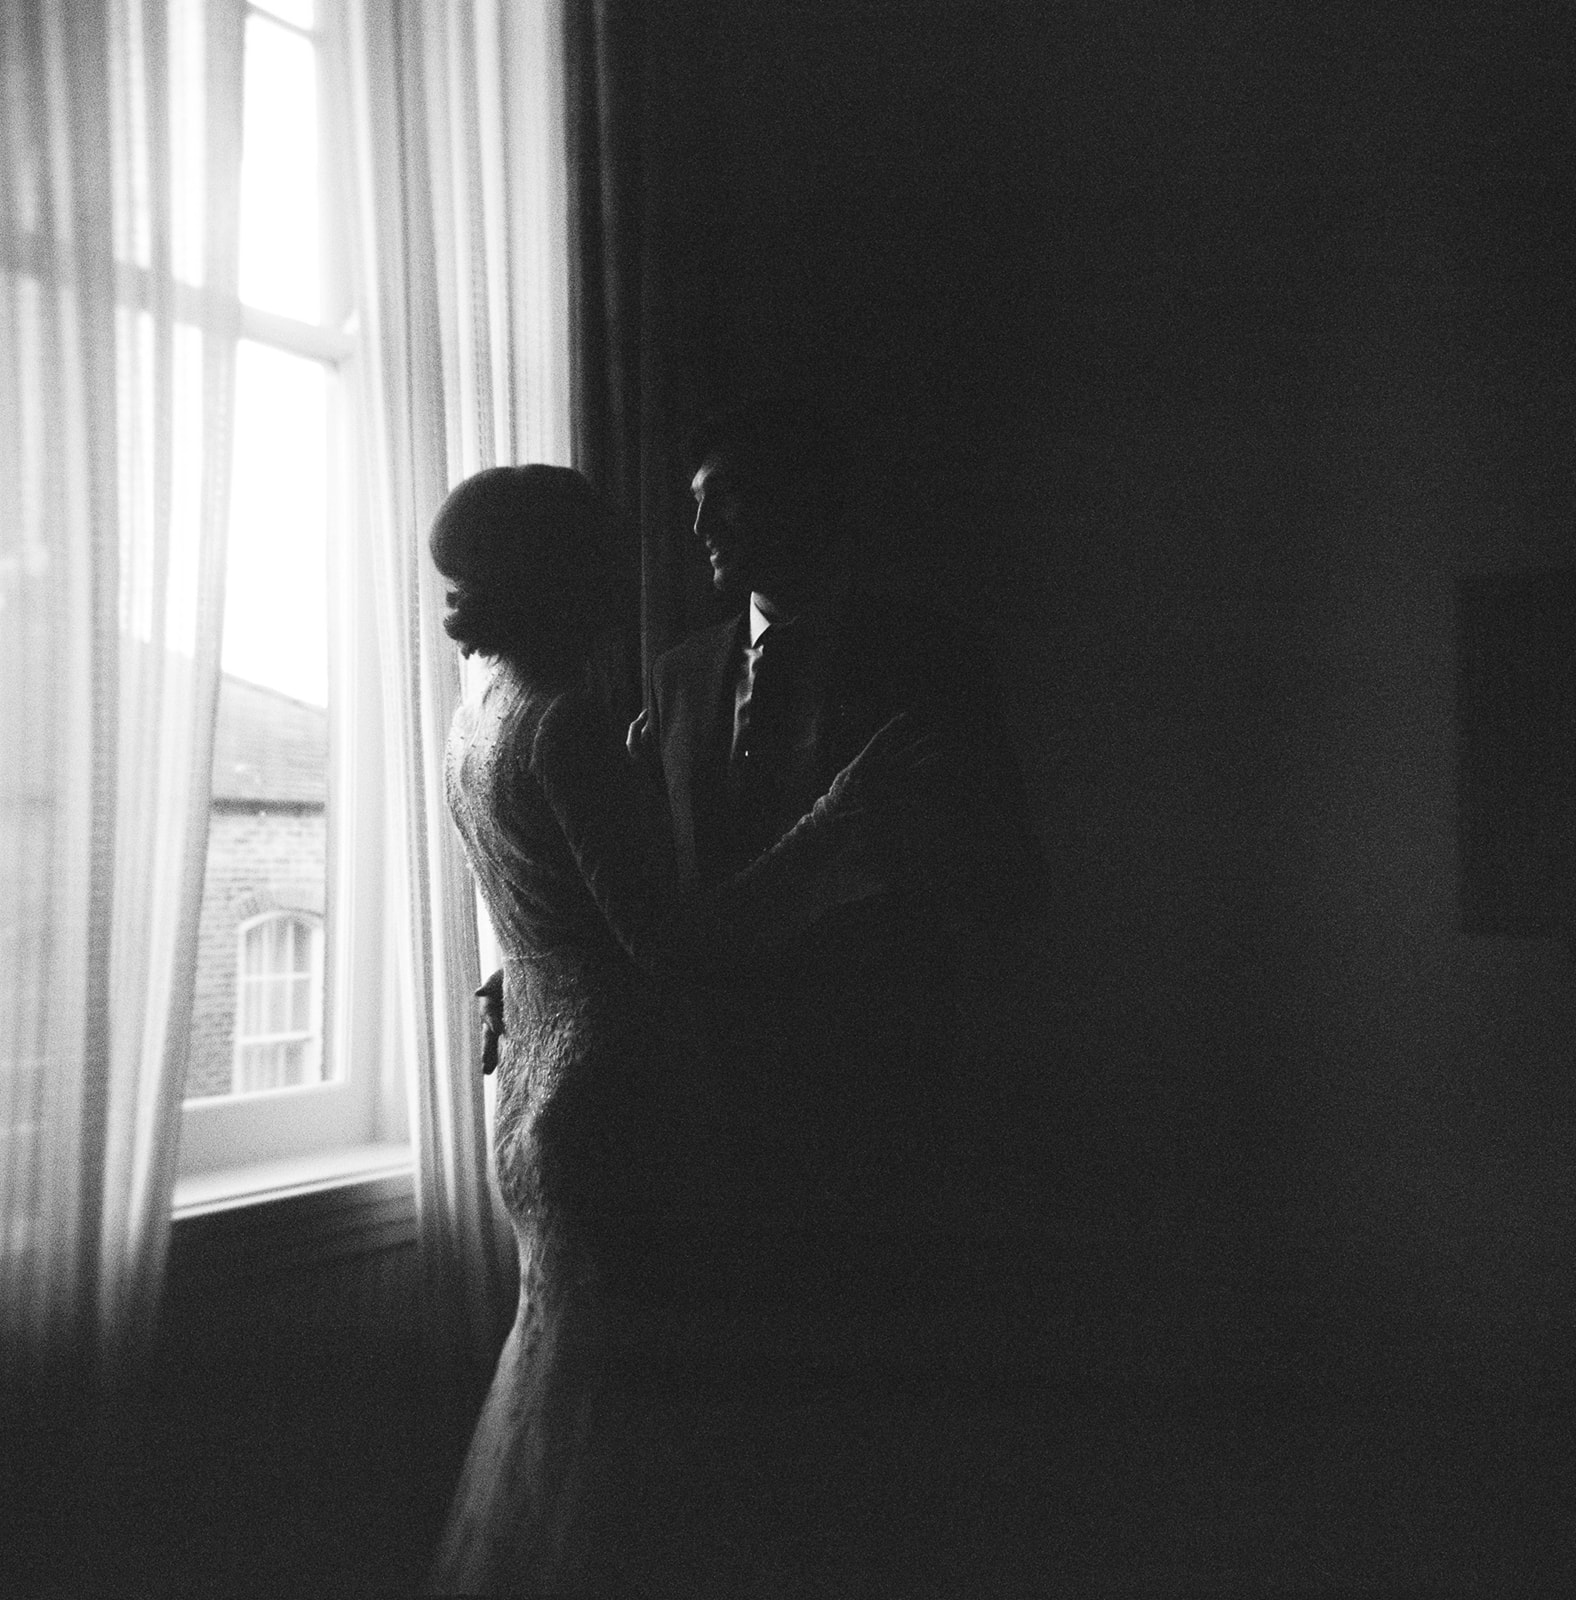 Romantic embrace of the bride and groom on Ilford Delta 3200 film